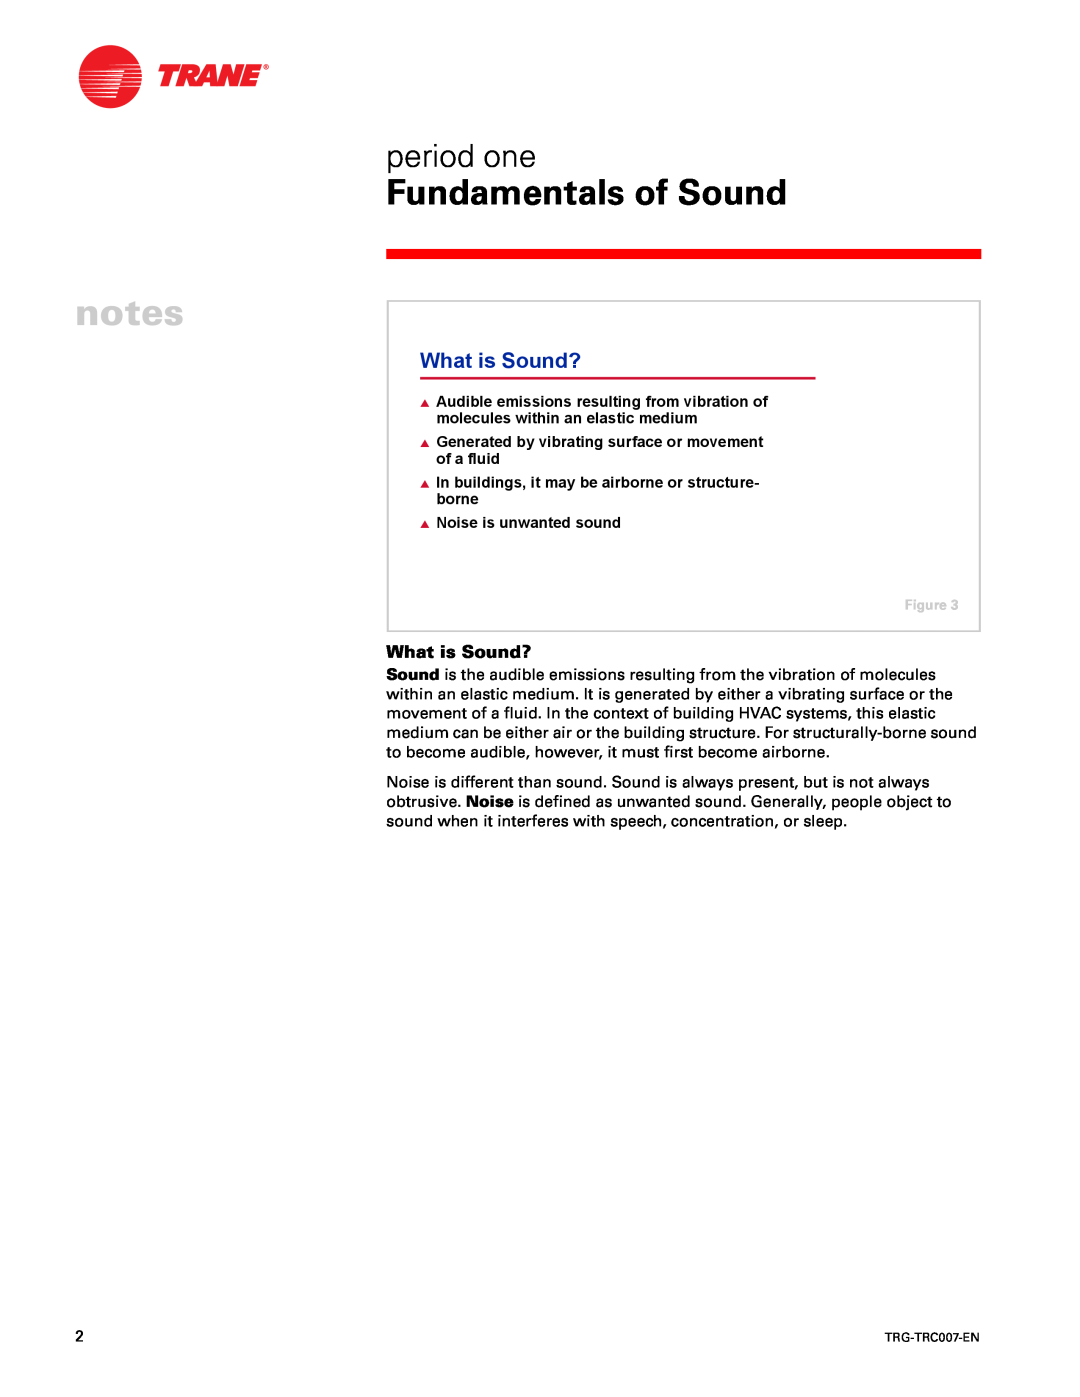 Trane TRG-TRC007-EN manual period one, What is Sound?, Fundamentals of Sound 